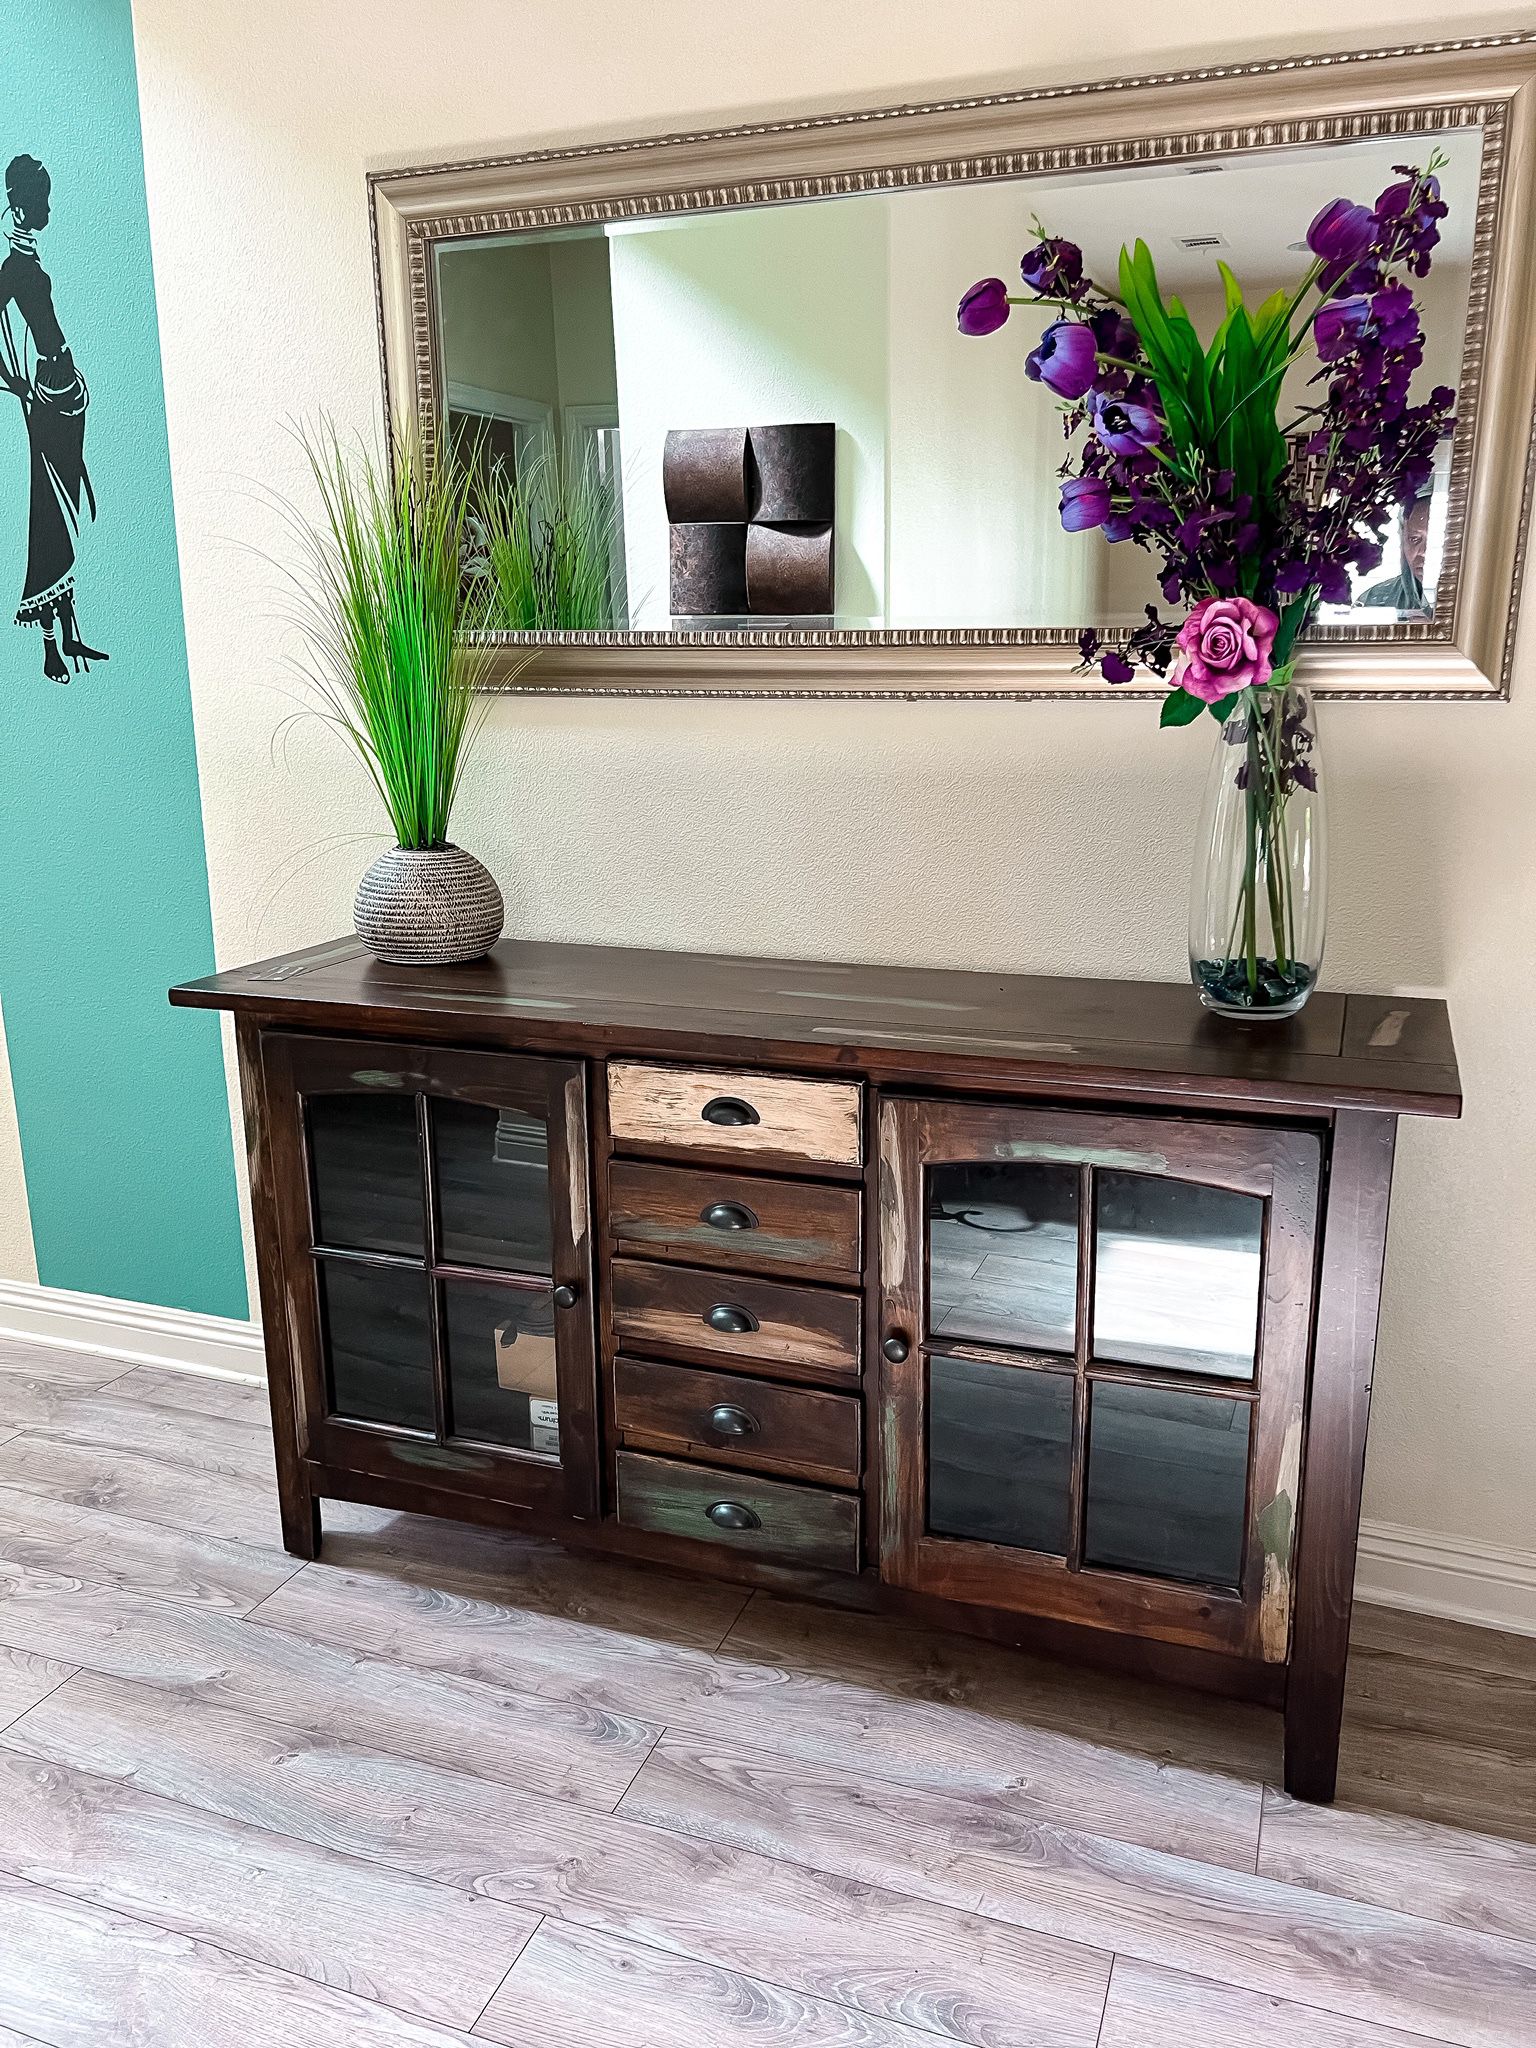 Reclaimed Wood Like Rustic Finish Sideboard/Entryway Console/Buffet Table  